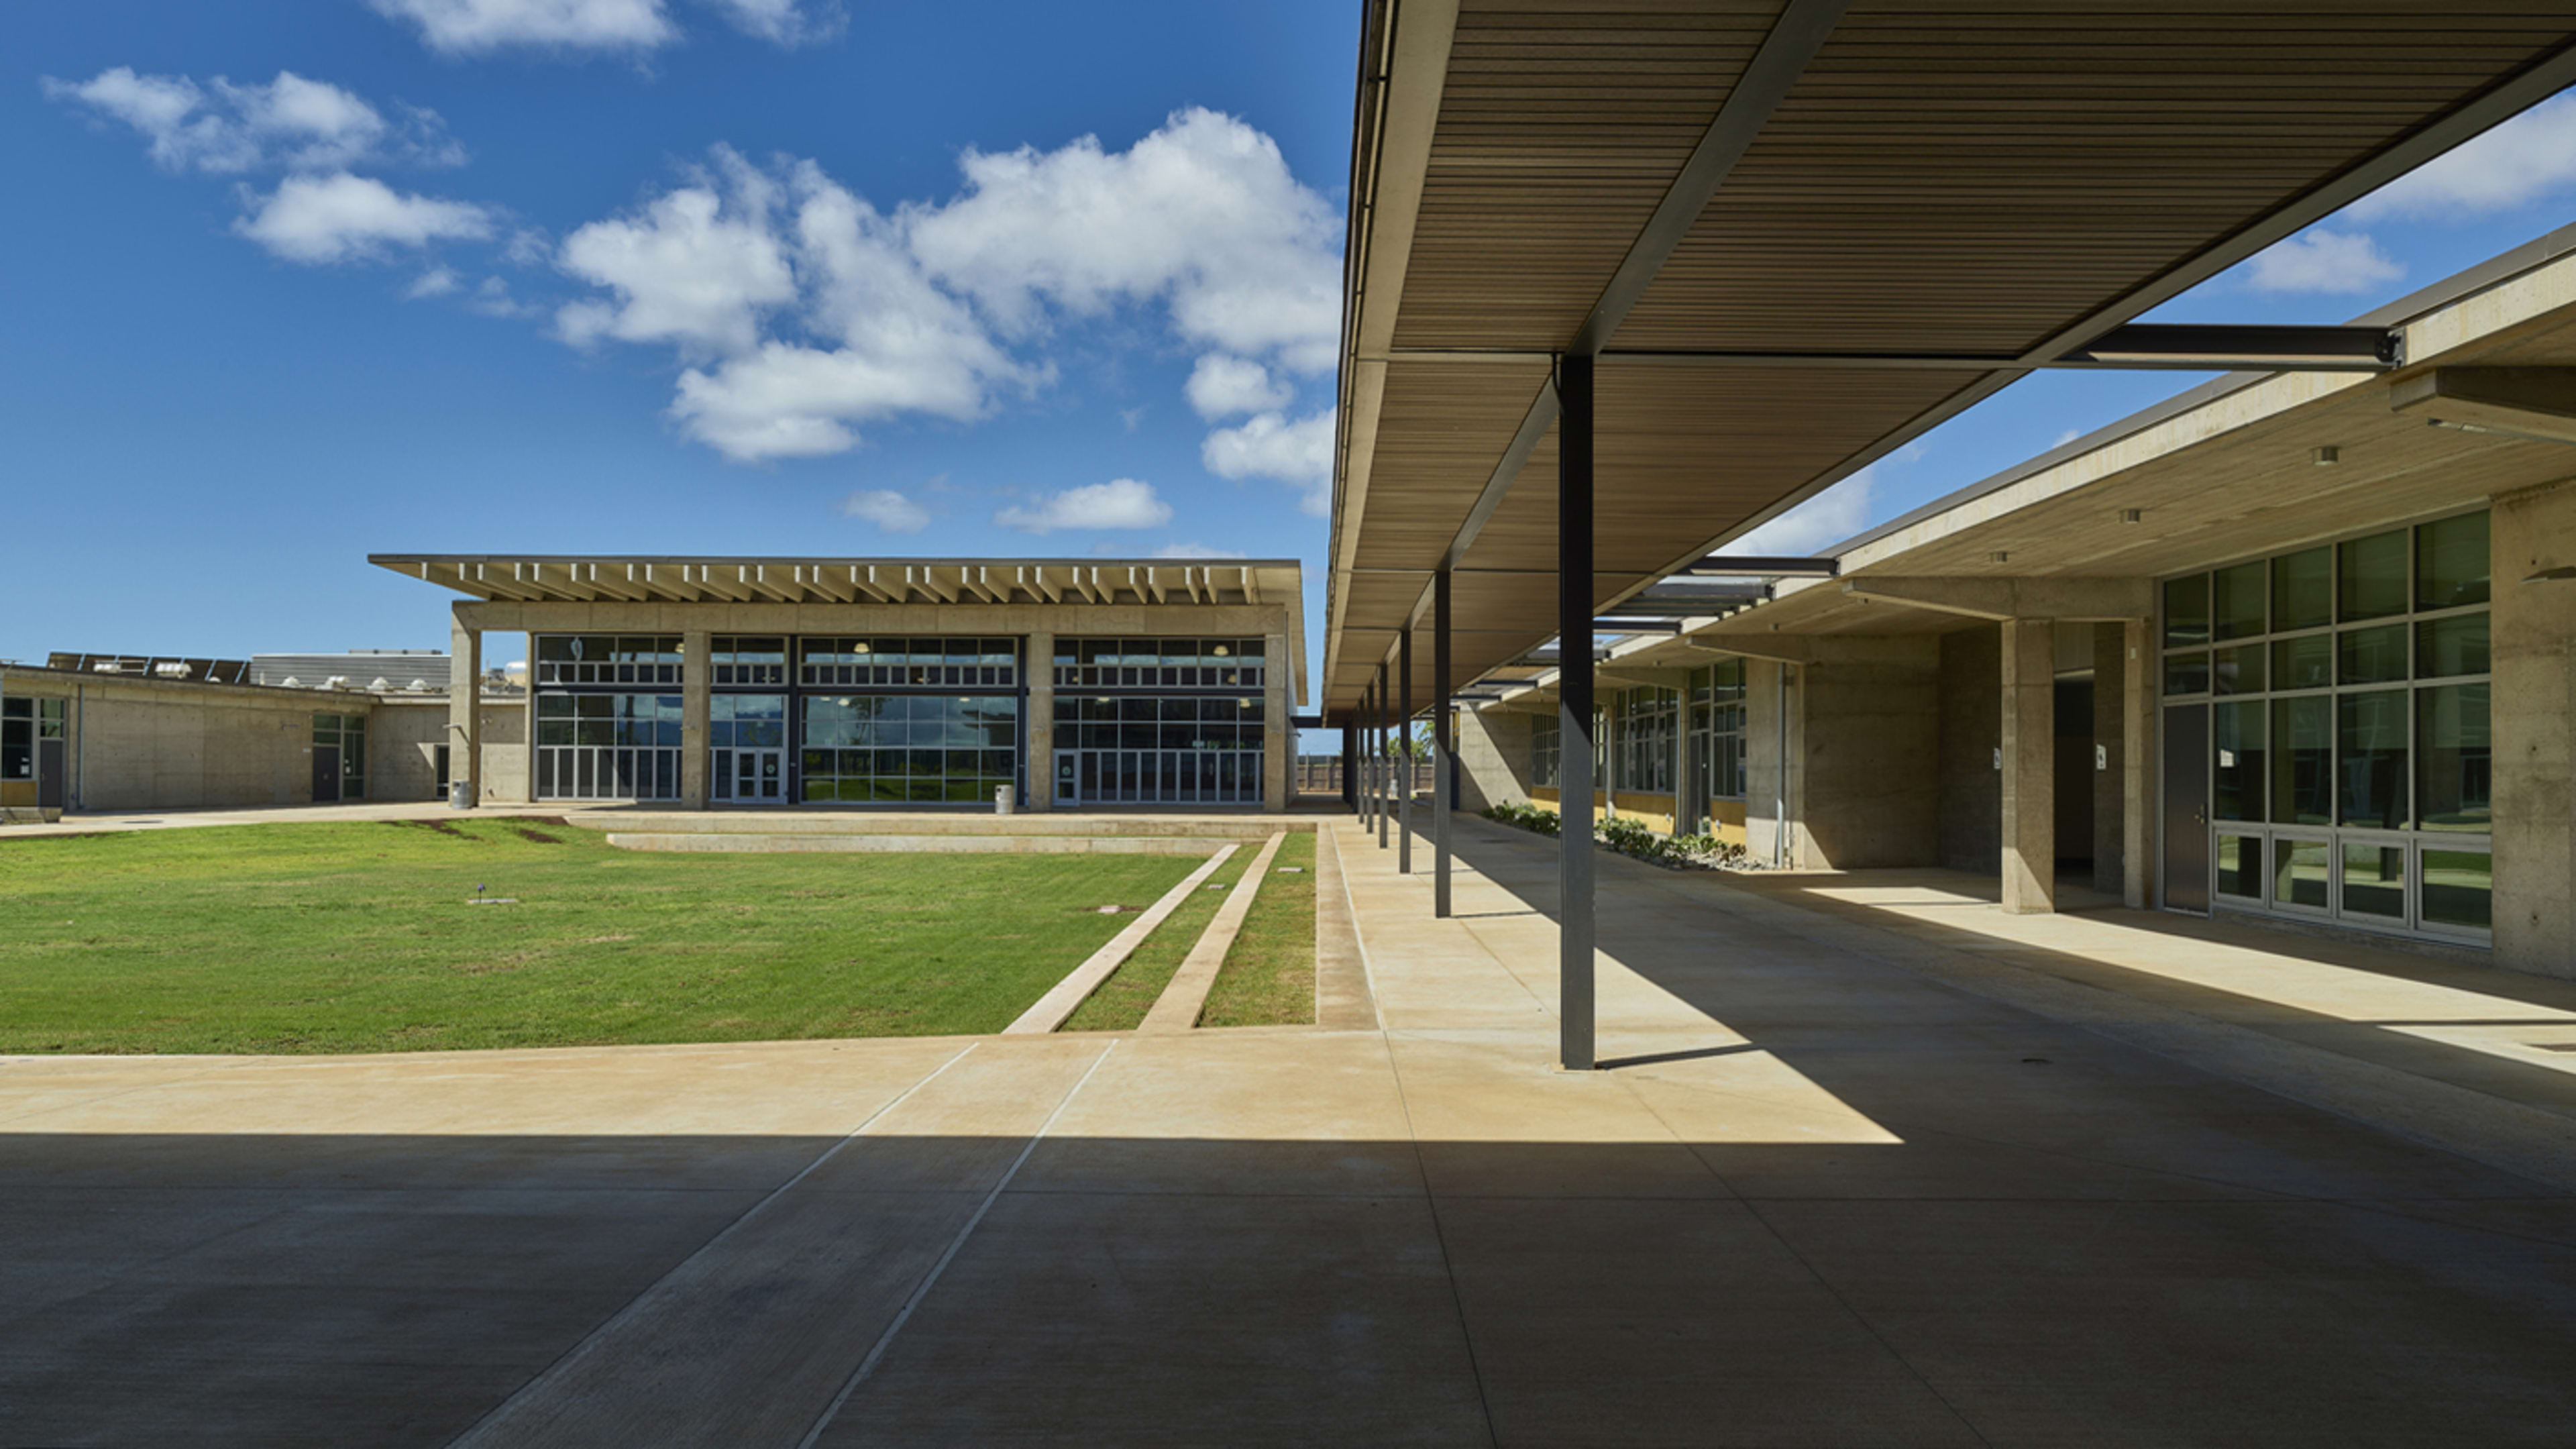 How an ancient design technique helped one Hawaii public school save $500,000 on energy